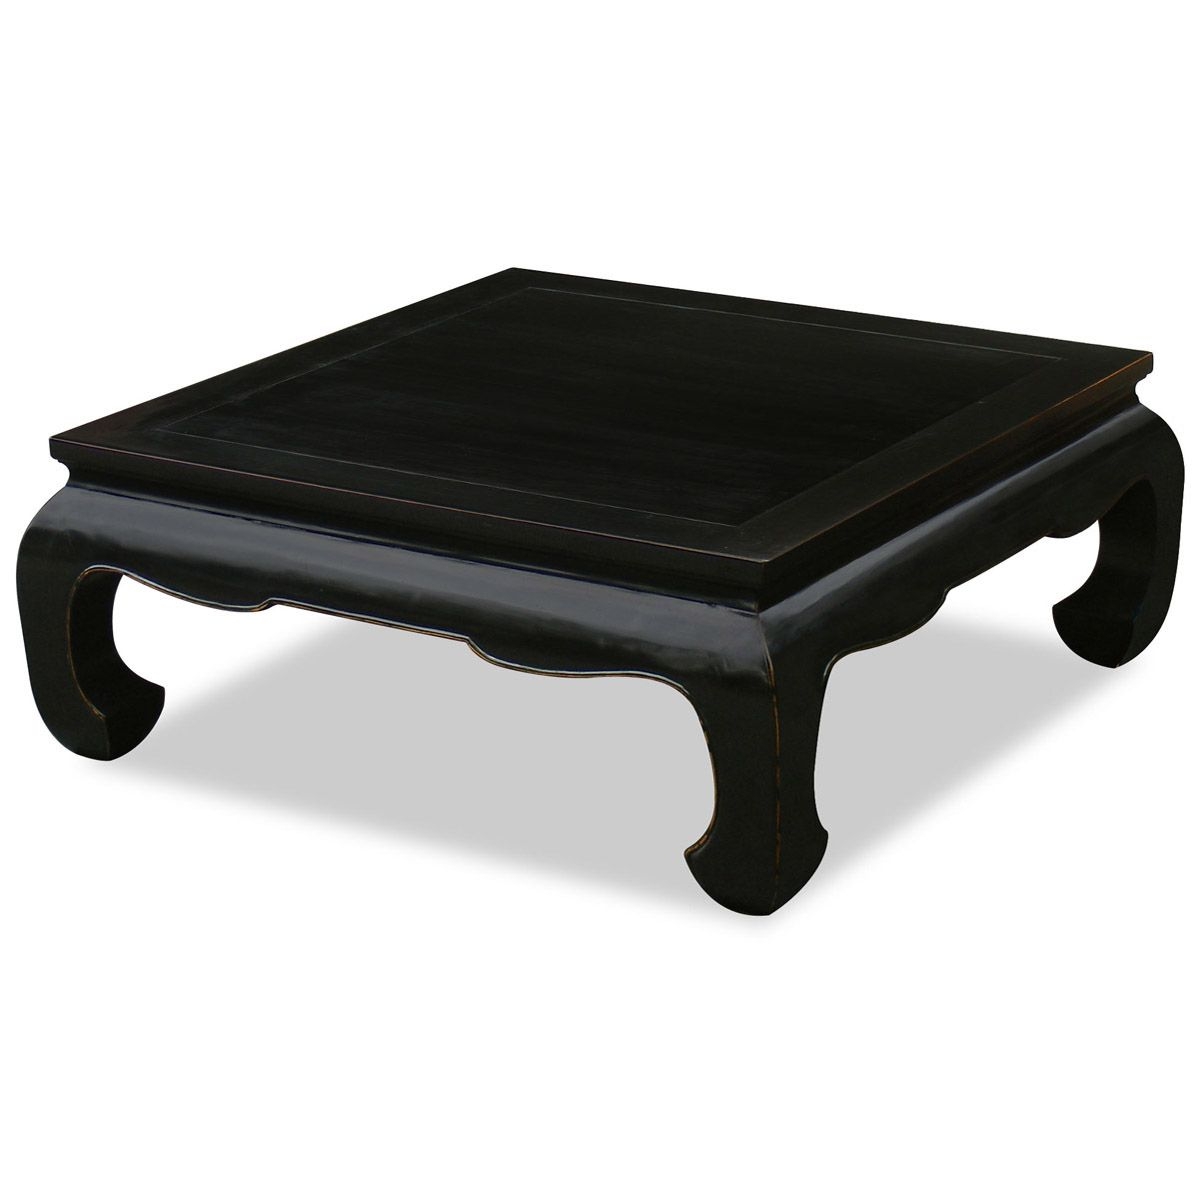 42in Ming Style Square Coffee Table - Black